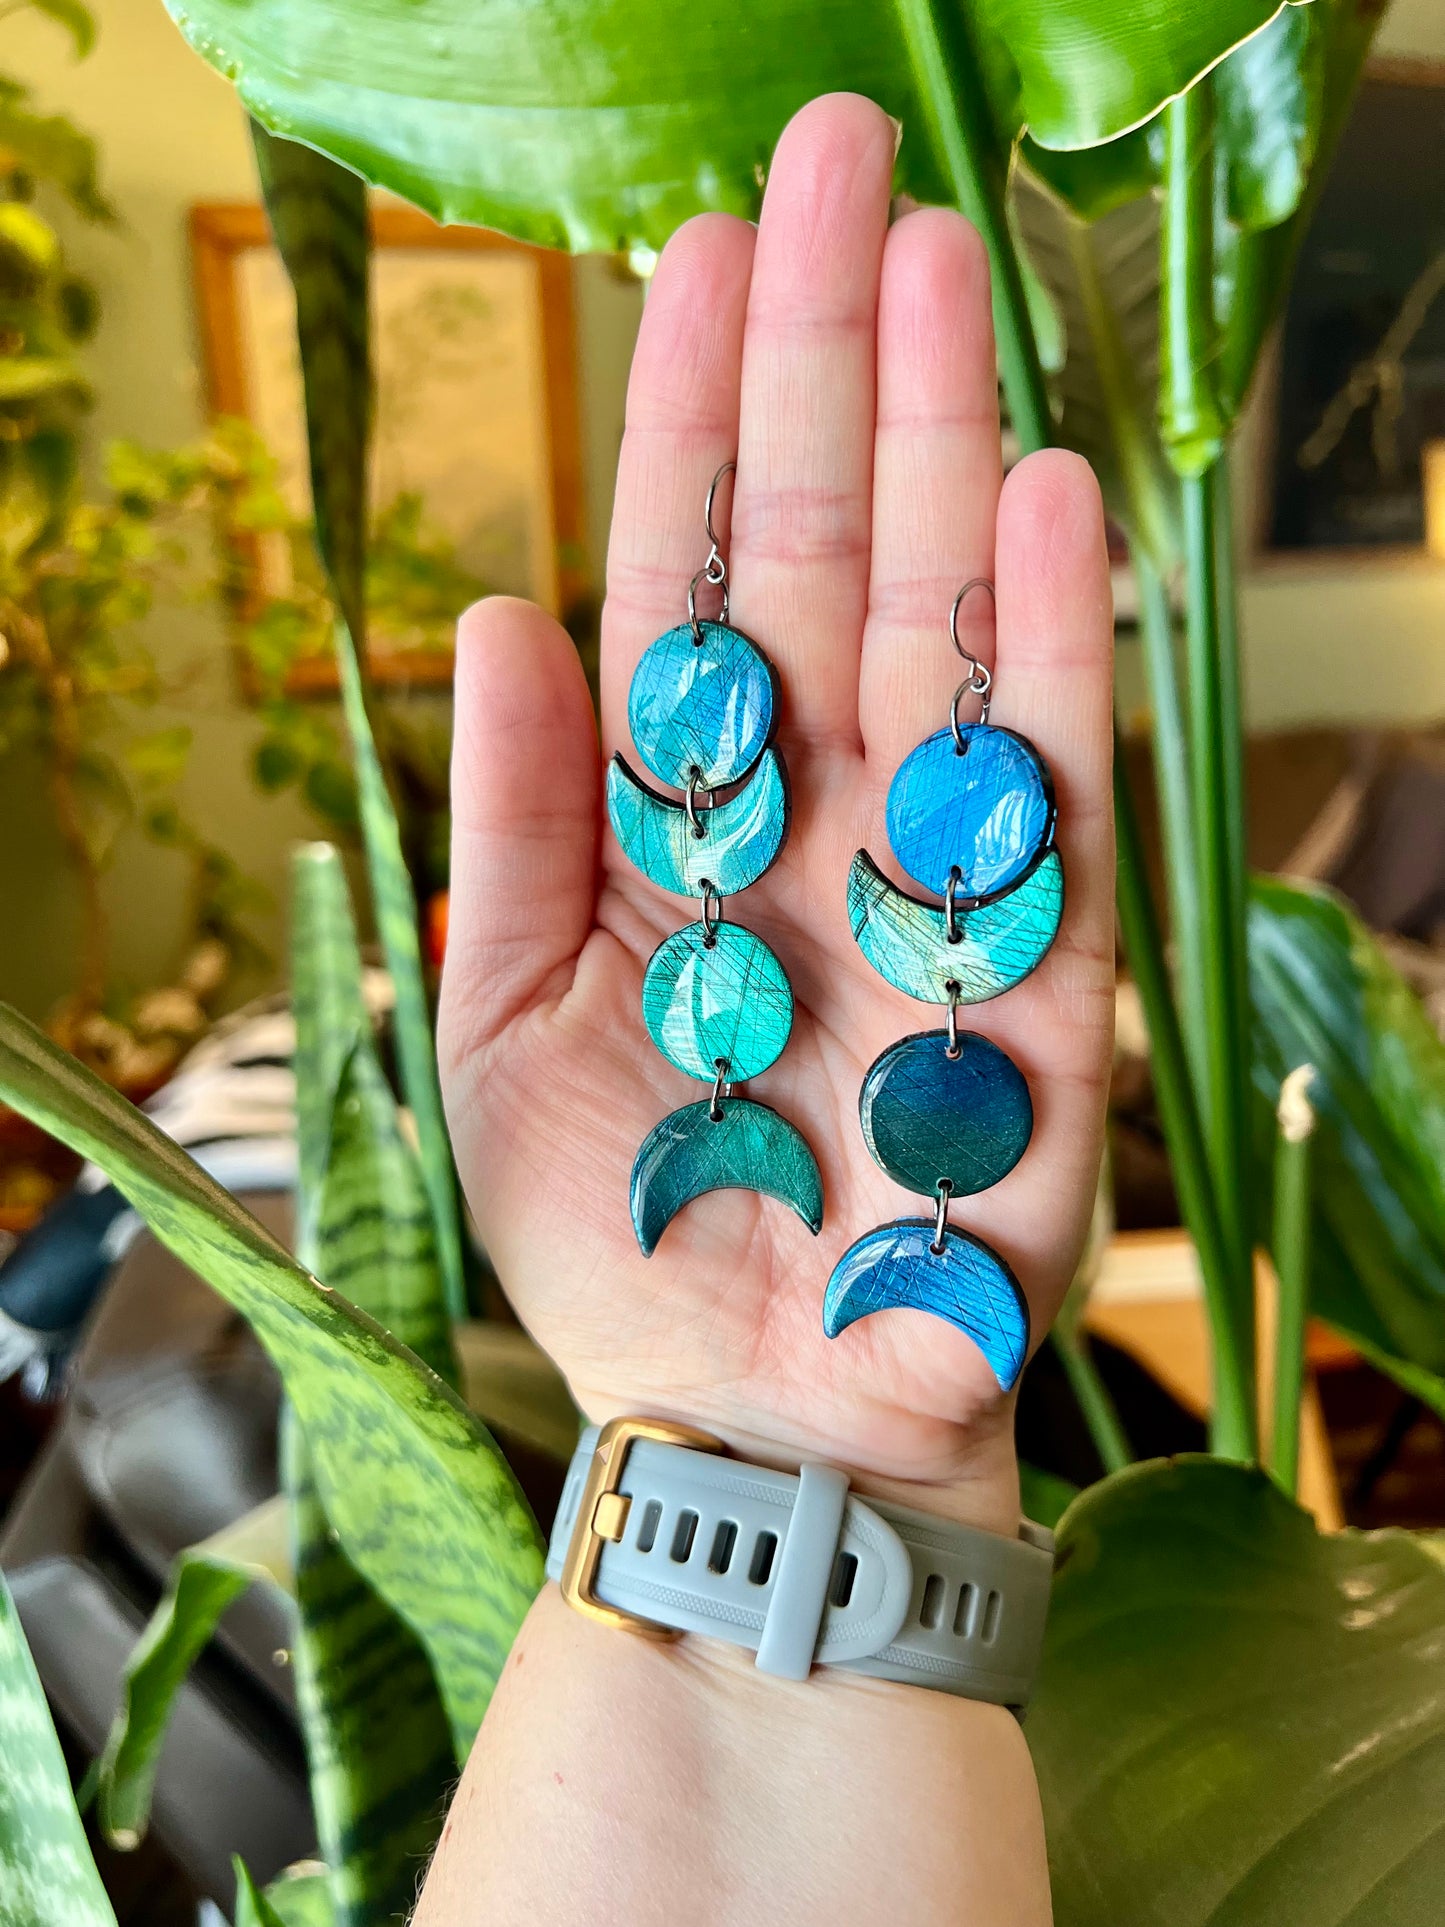 Handcrafted polymer clay earrings featuring mica pigments, resembling labradorite stone. Channeling labradorite's healing properties for balance, protection, and spiritual growth.